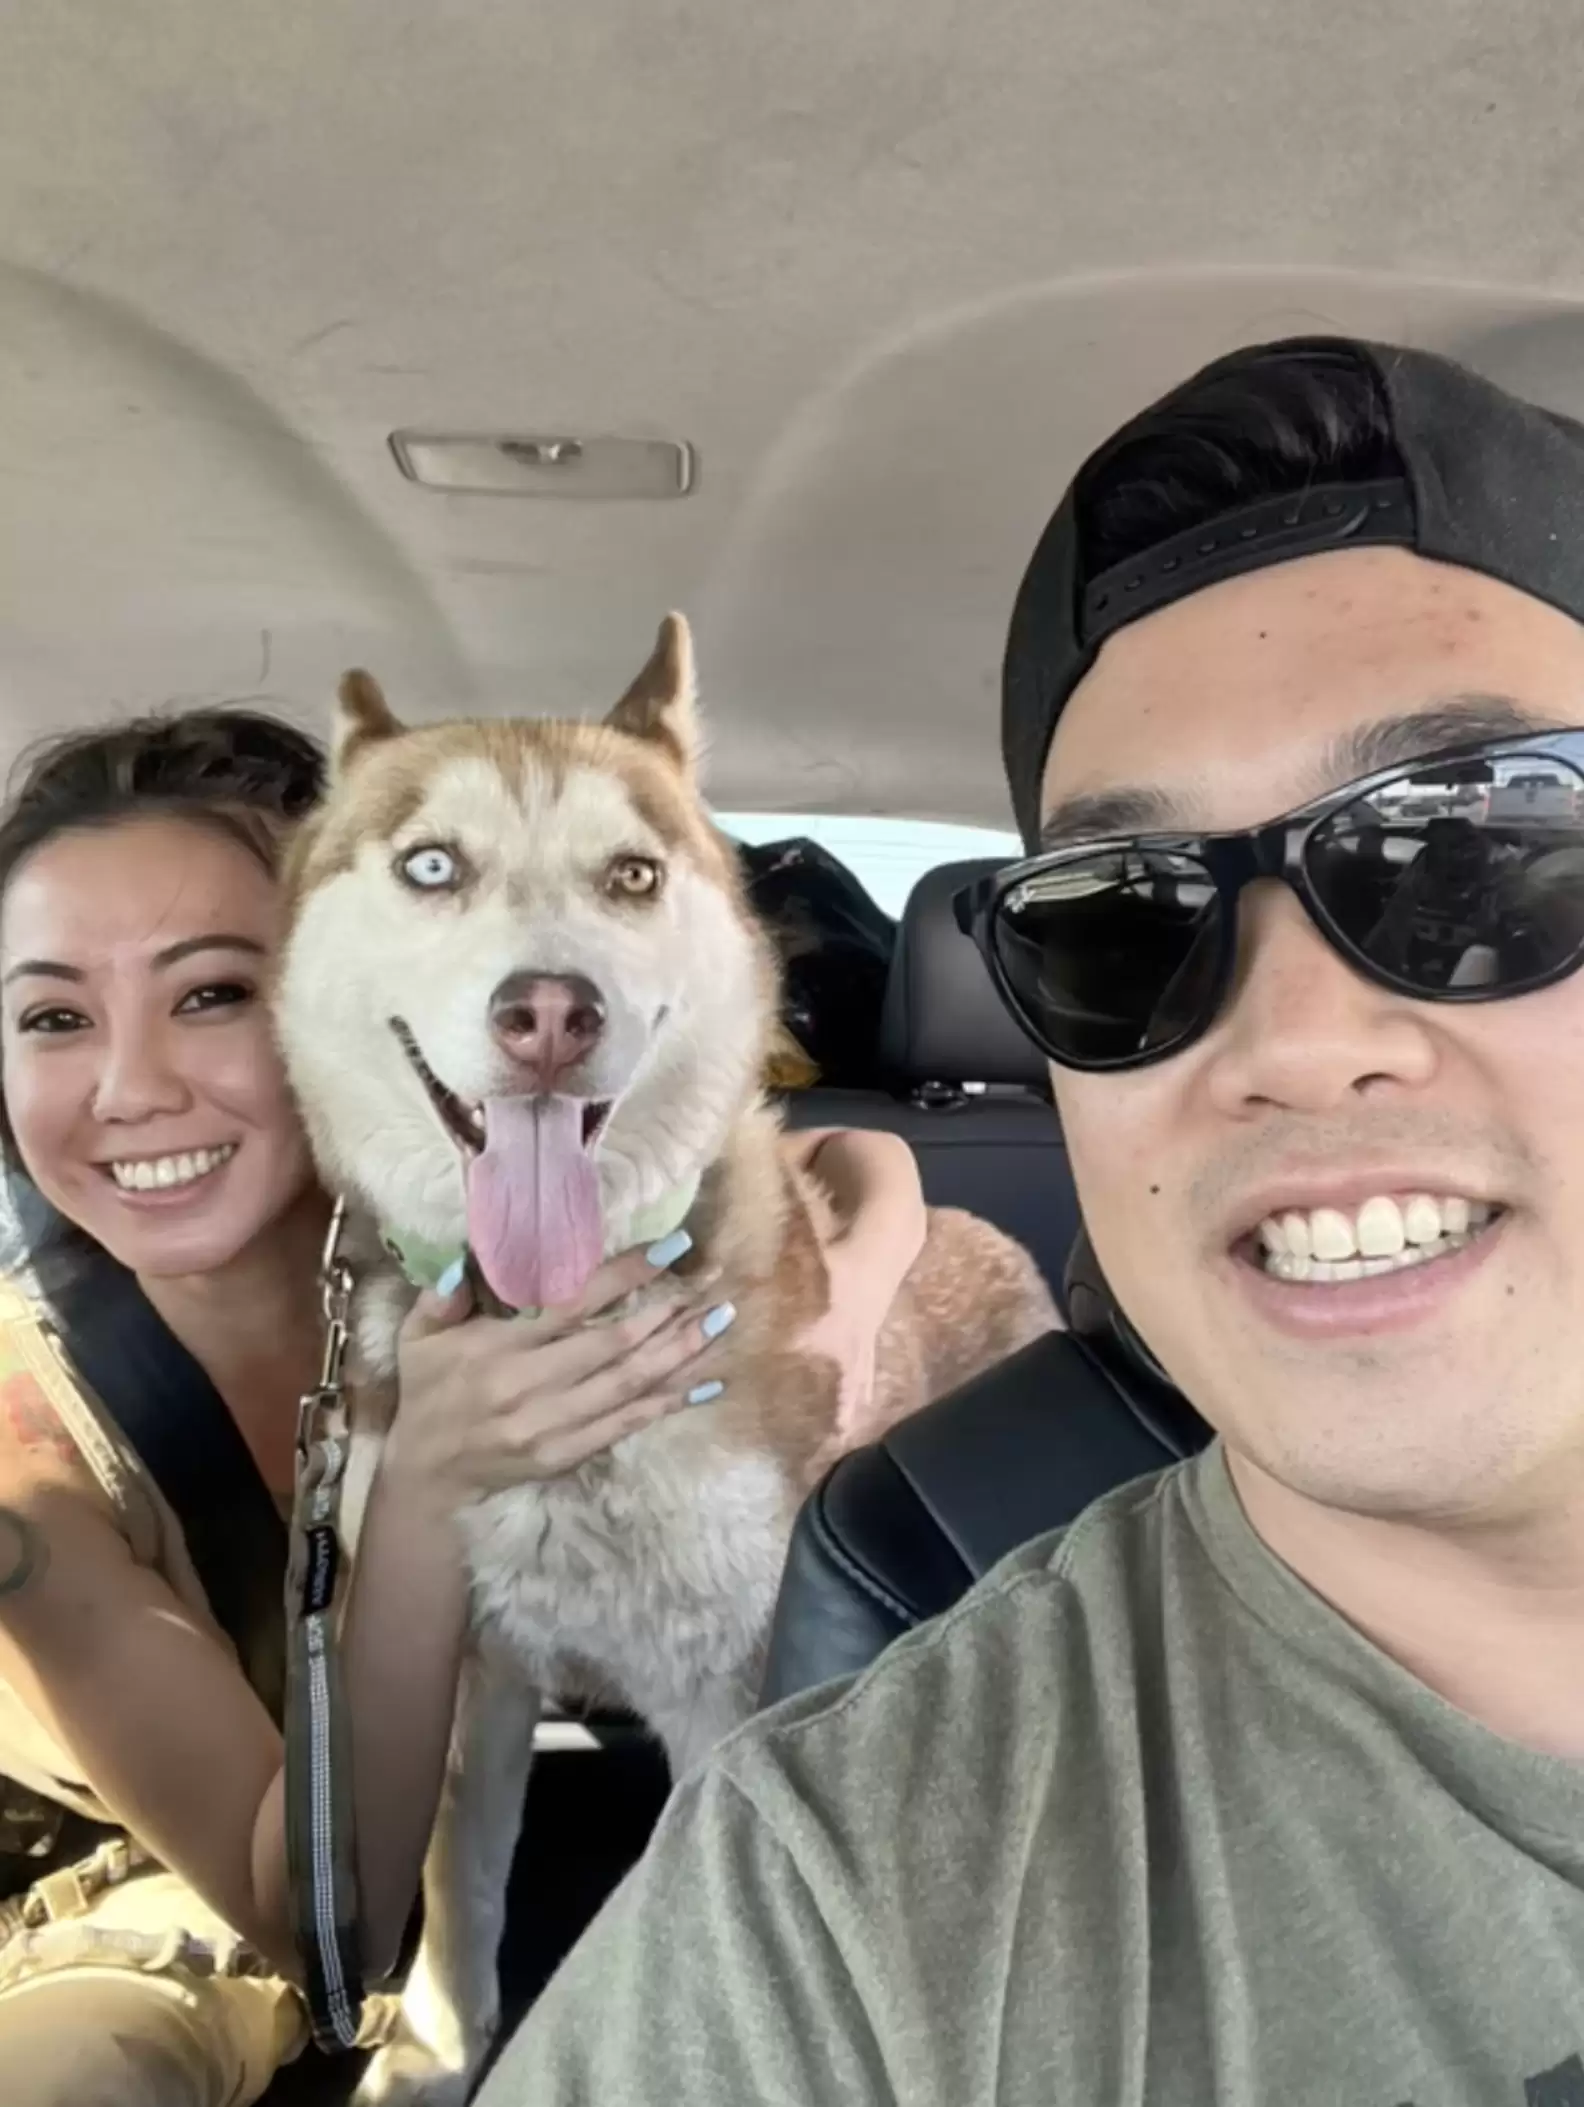 a man and a woman take a picture with a dog in a car